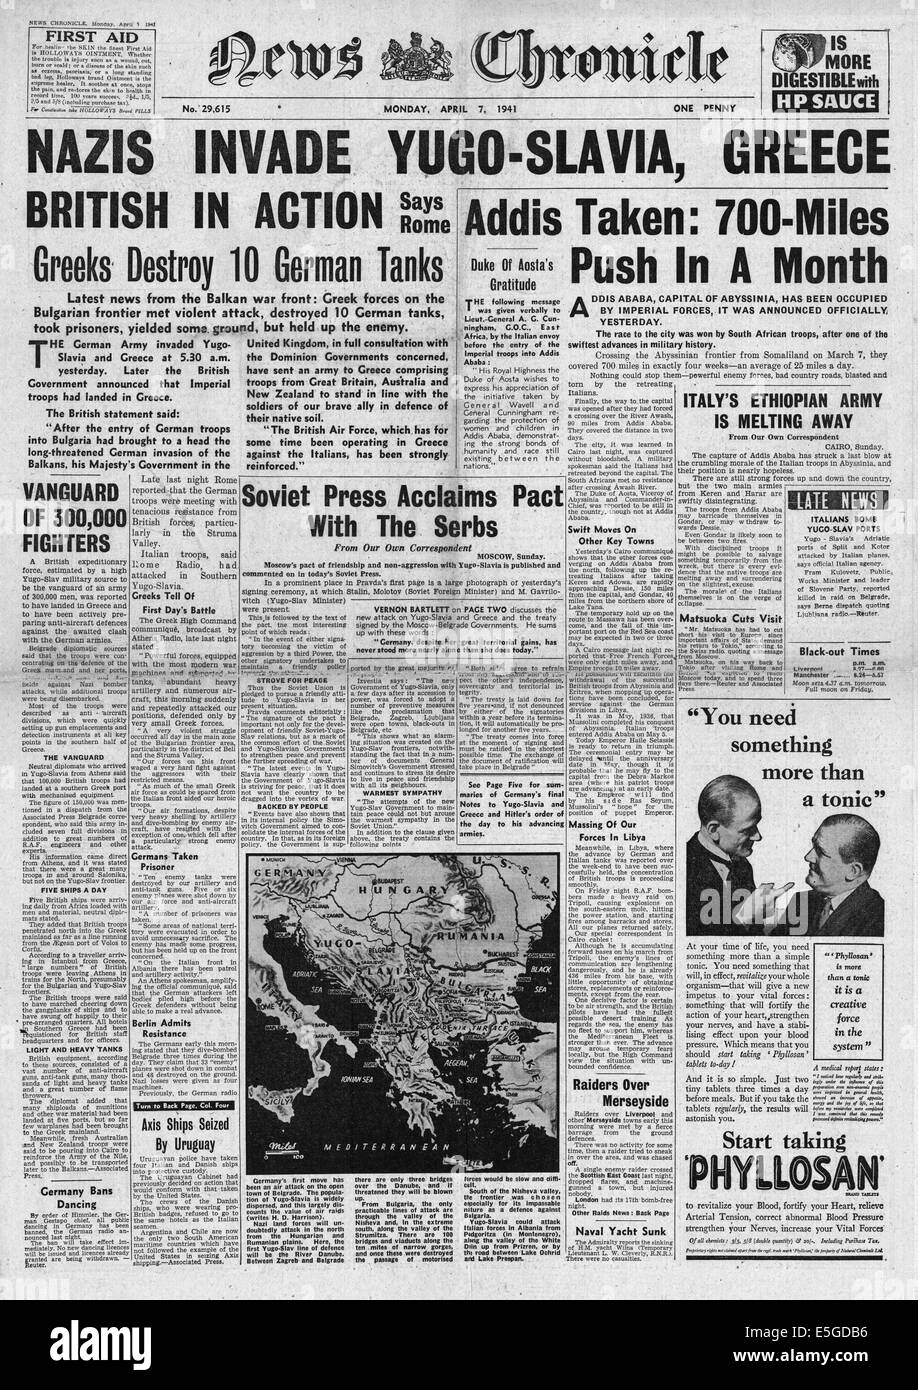 Image result for germans and italians invade greece and yugoslavia - newspapers